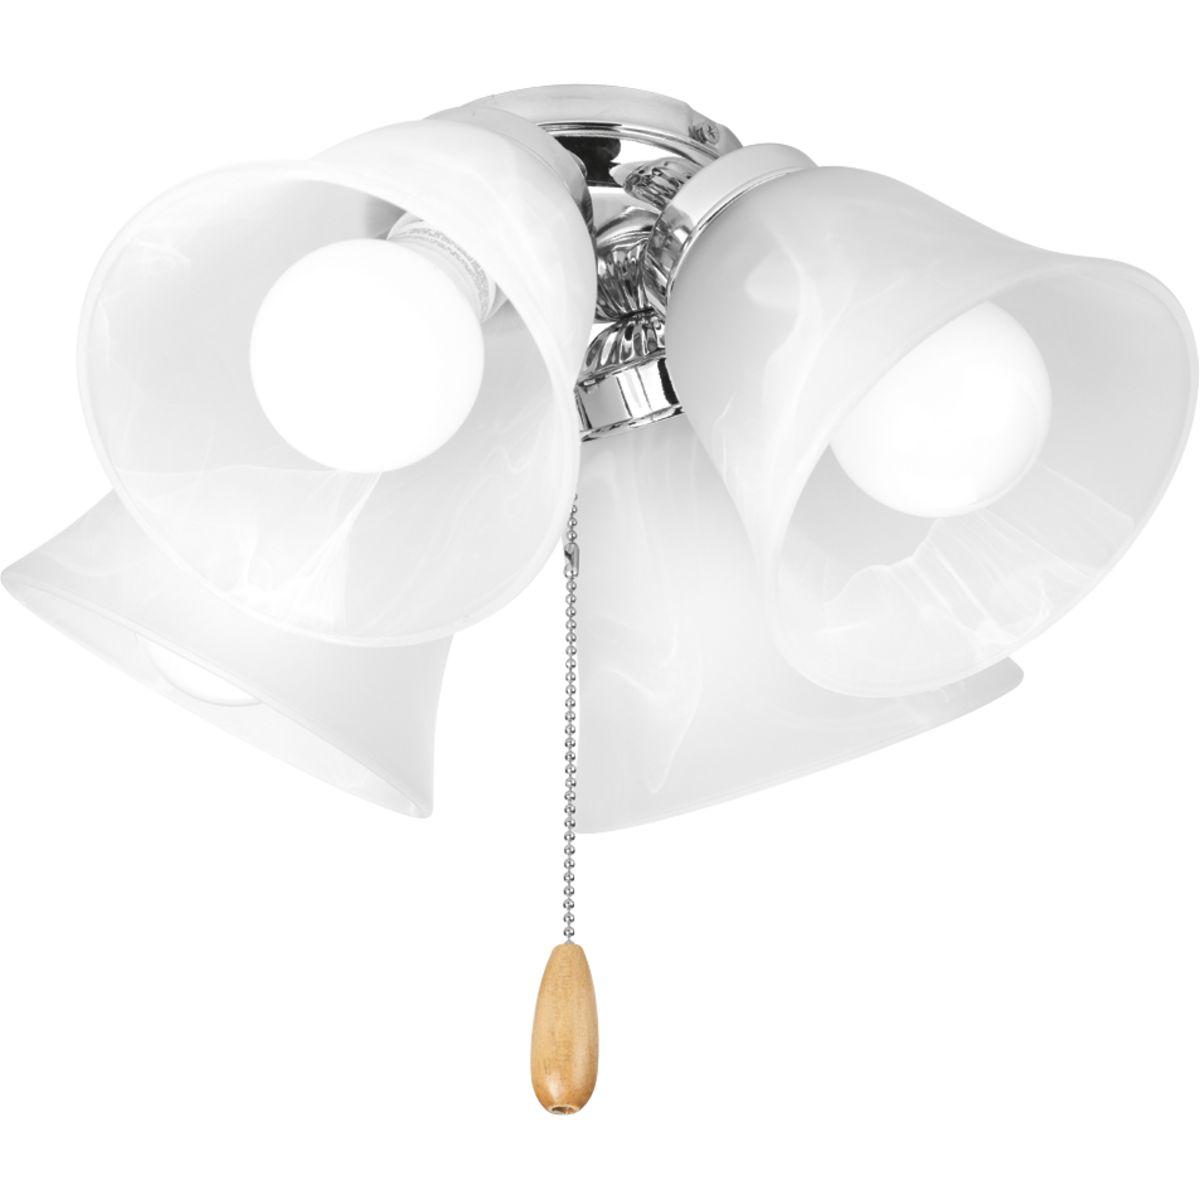 Hubbell P2610-15WB Four-light kit with white washed alabaster style glass shades beautiful in design. Innovative spring clip glass attachment system eliminates unsightly excess hardware. Good for use with P2500 and P2501 ceiling fans and includes quick connector for easy wi